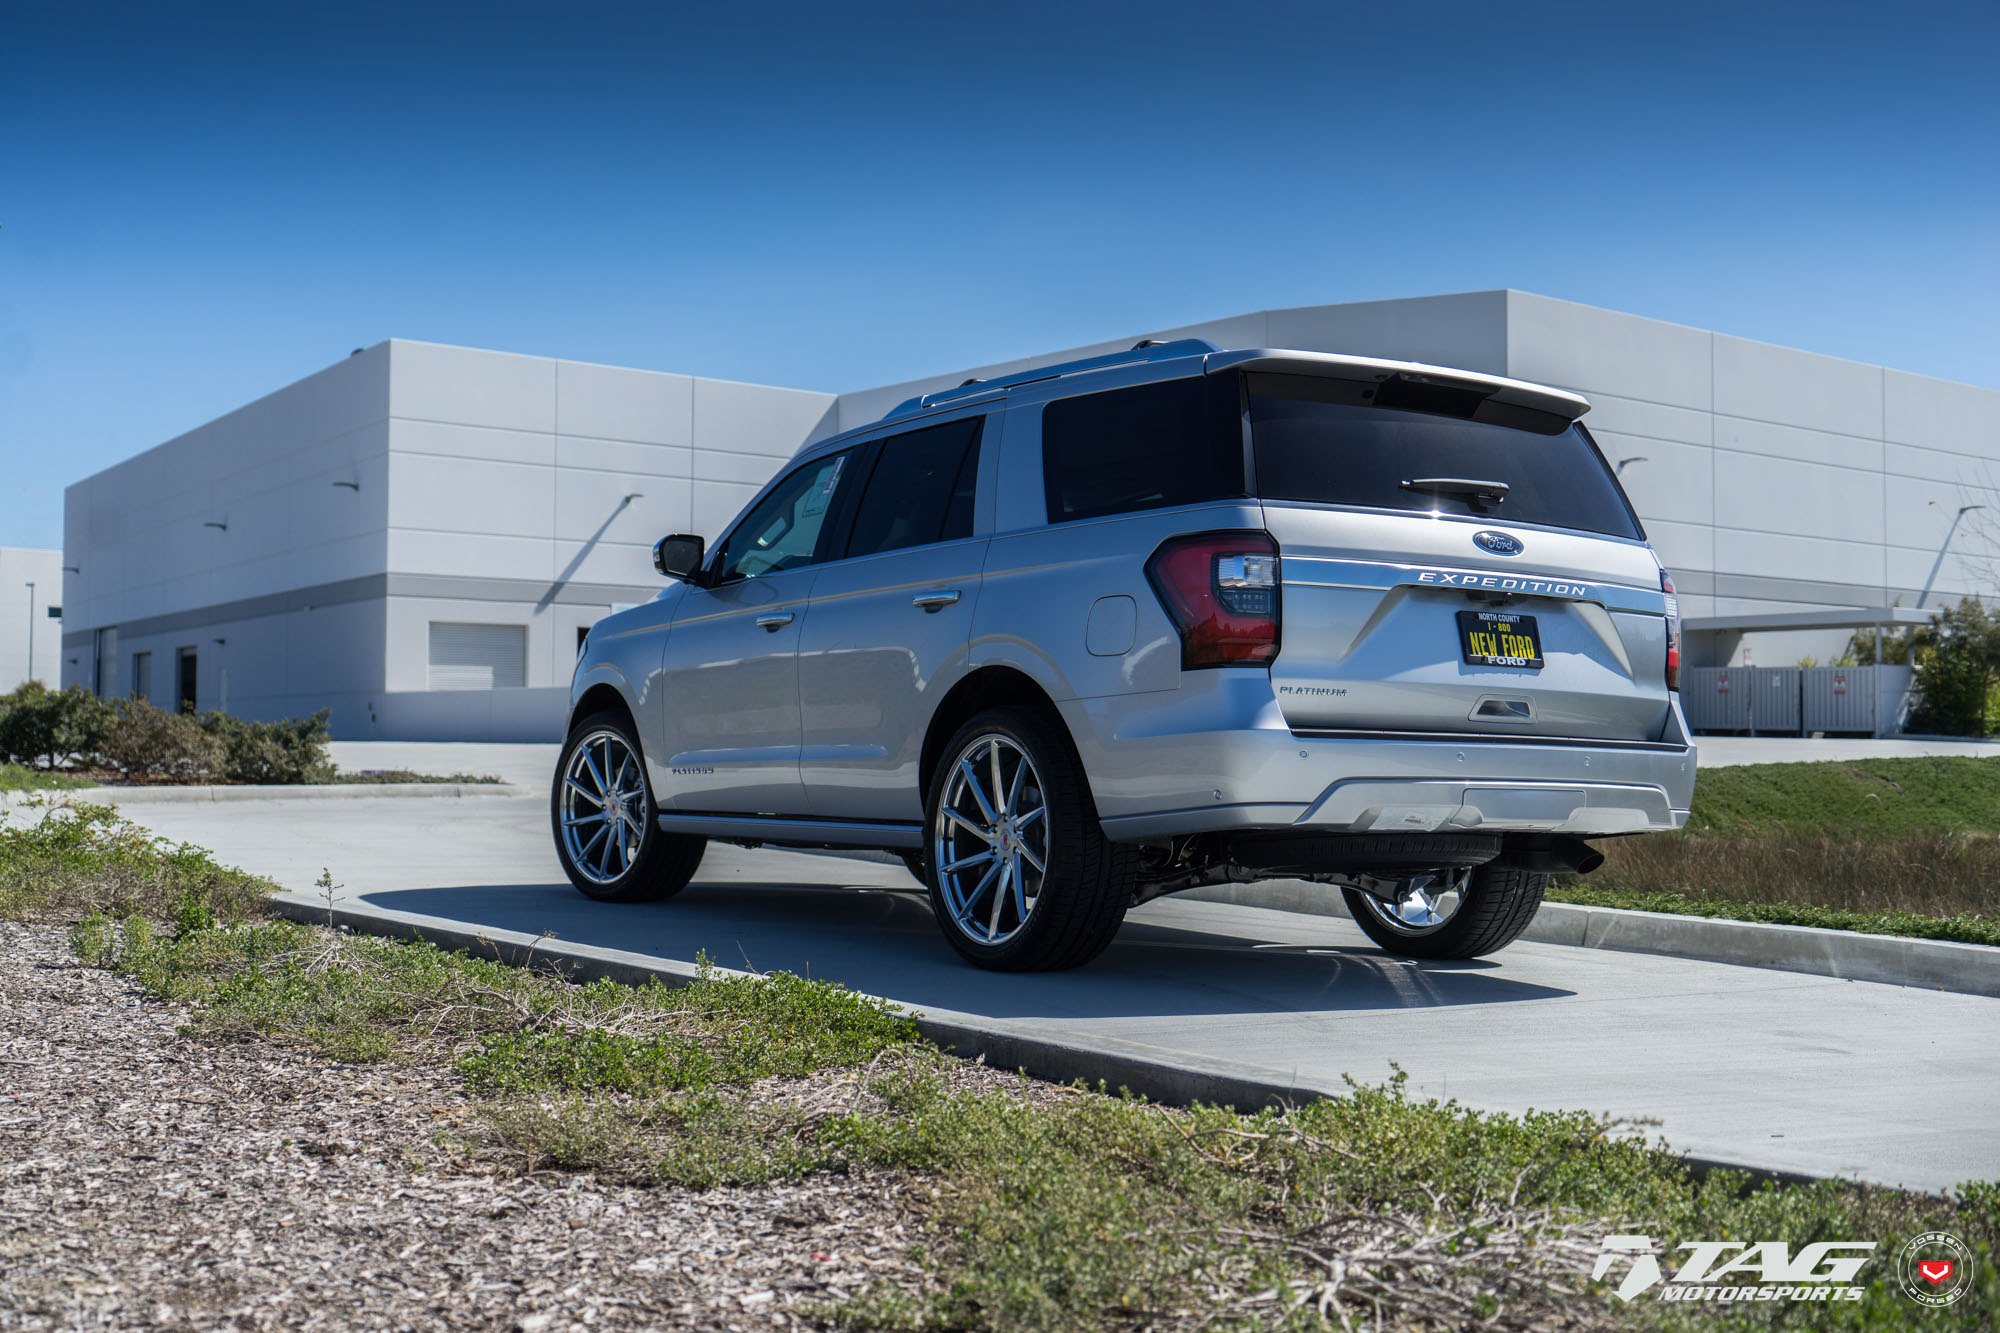 Custom Silver Ford Expedition Roofline Spoiler - Photo by Vossen